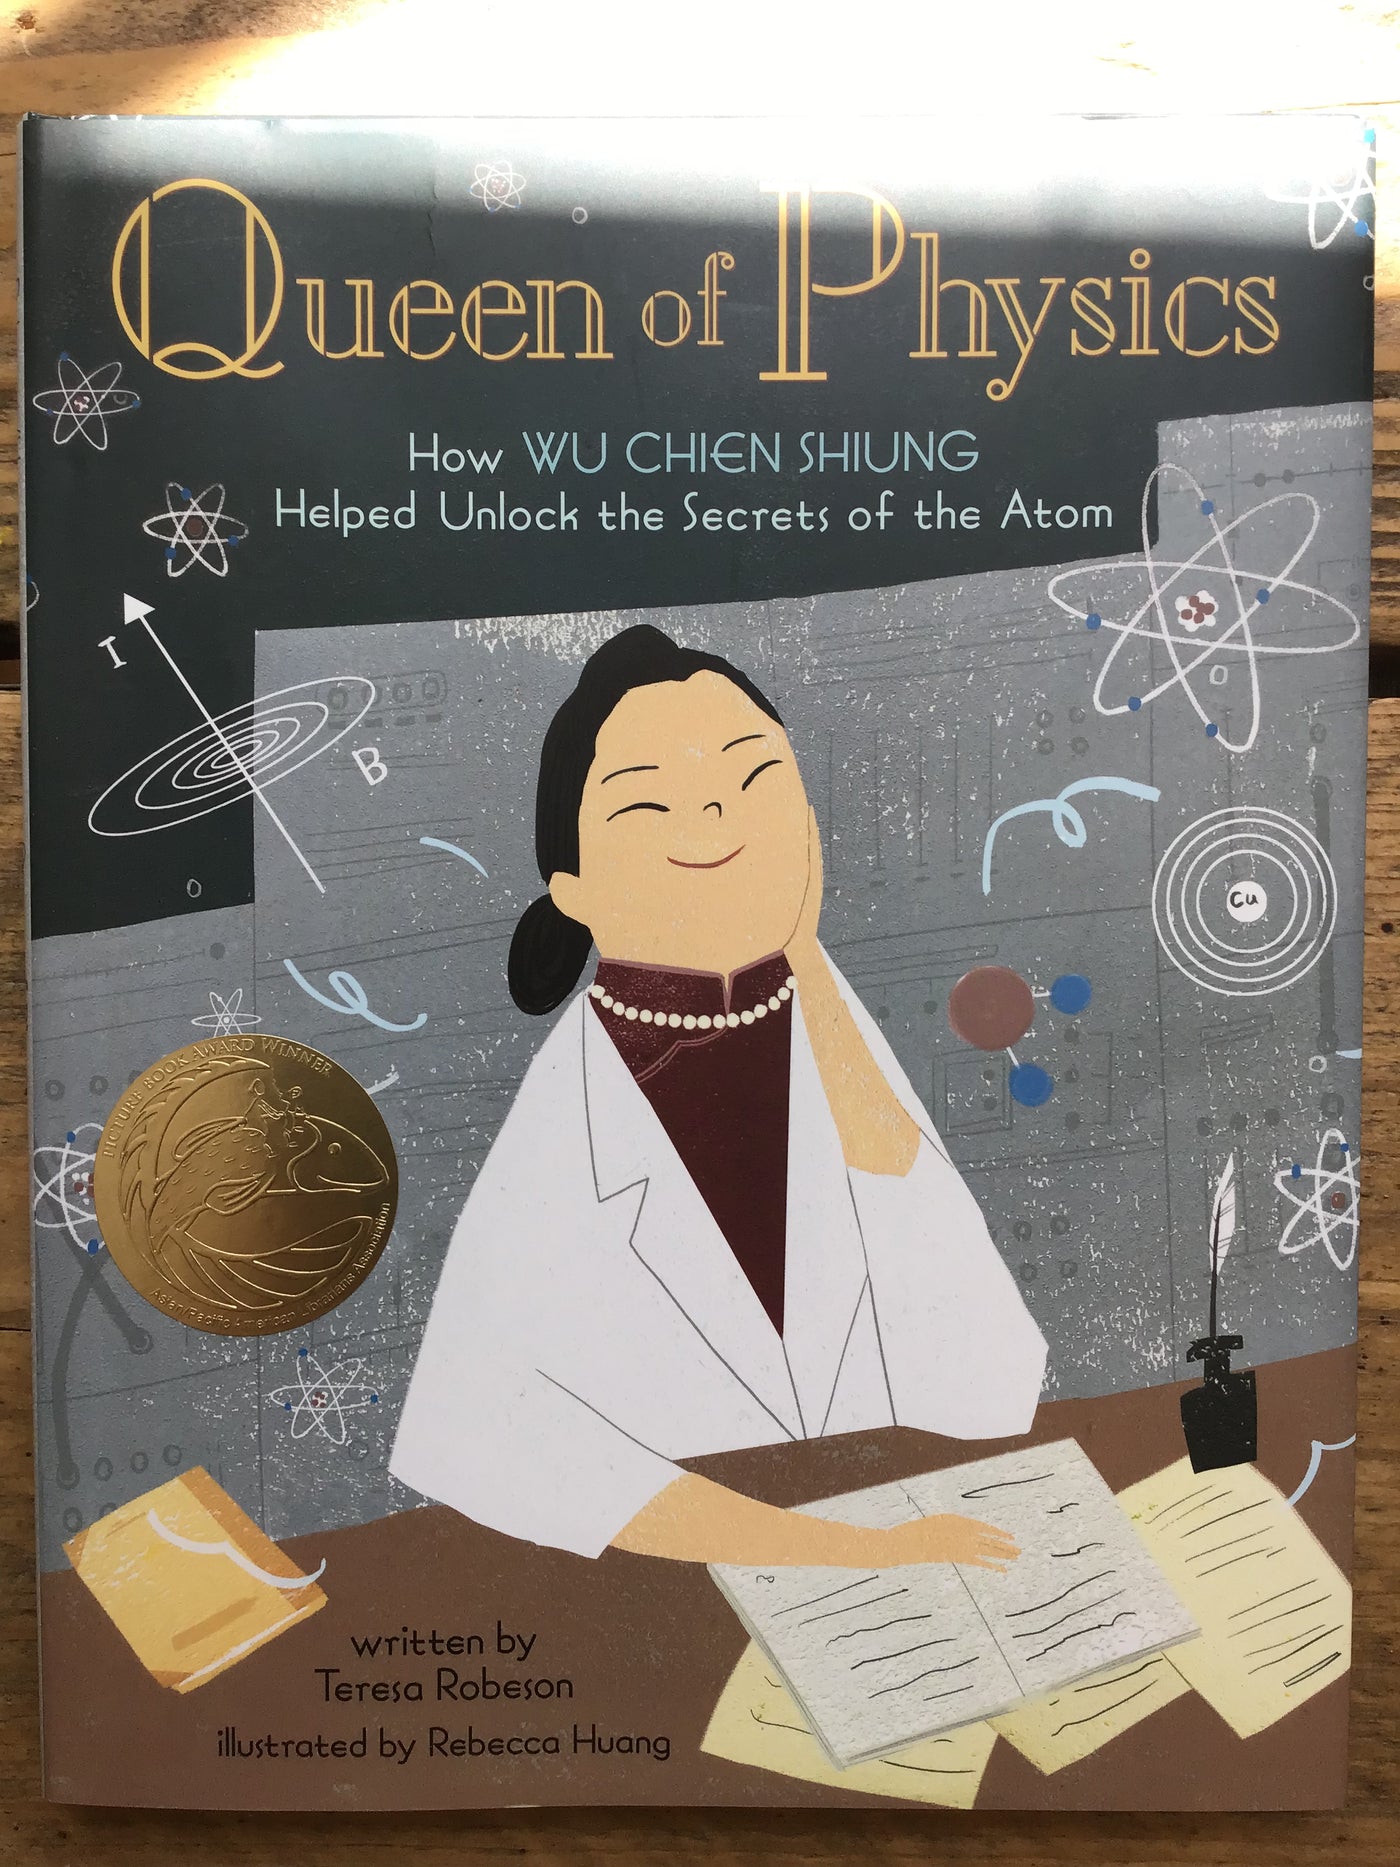 Queen of Physics